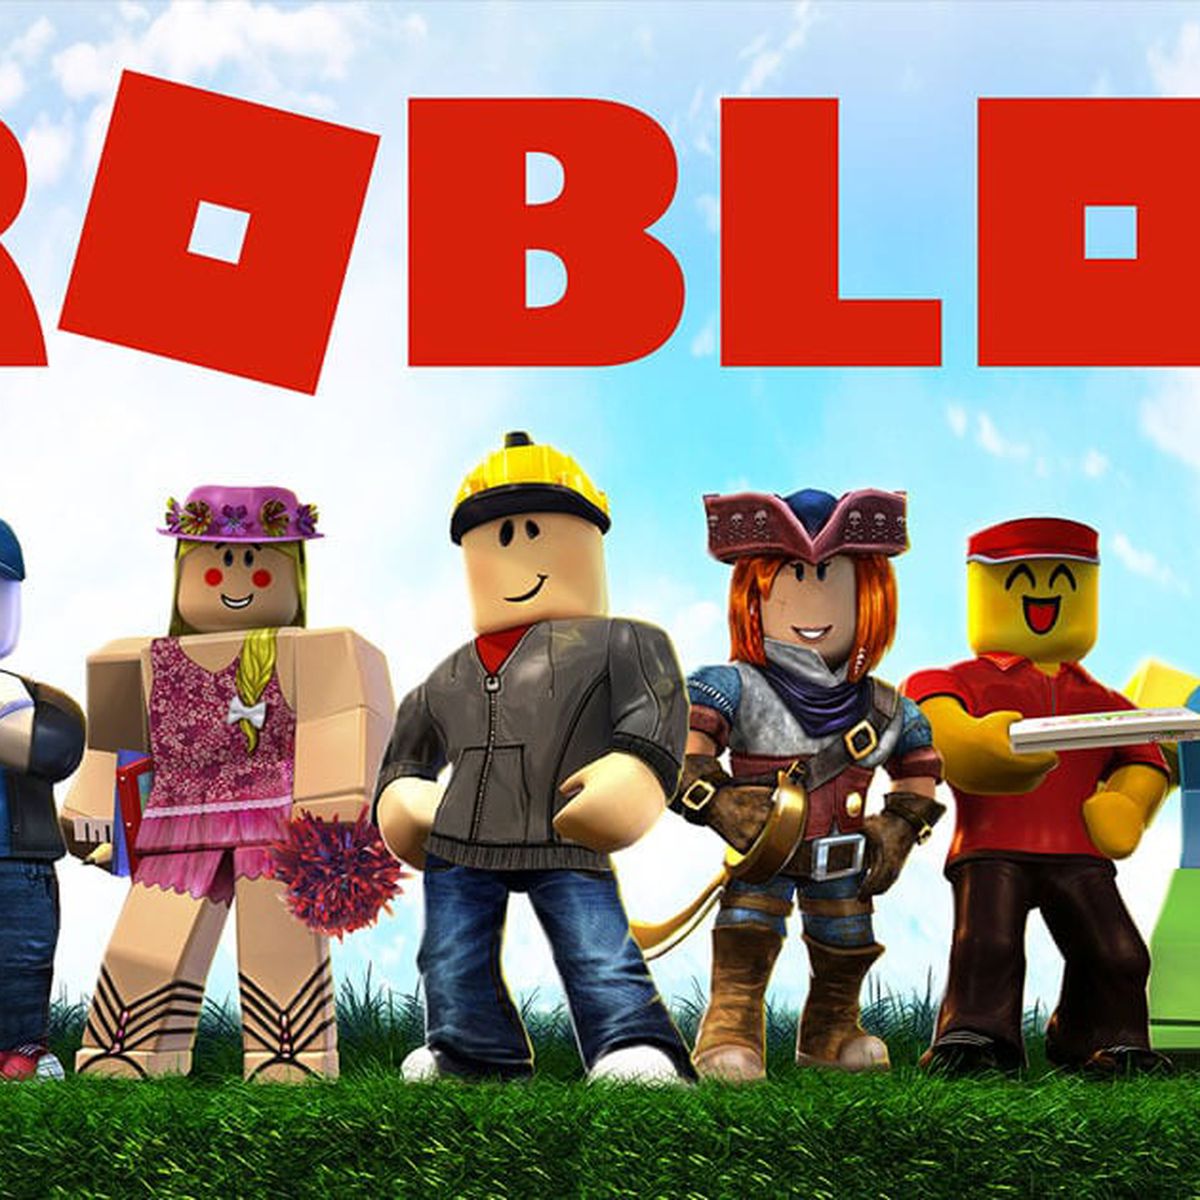 Roblox Live Wallpapers & Skins on the App Store